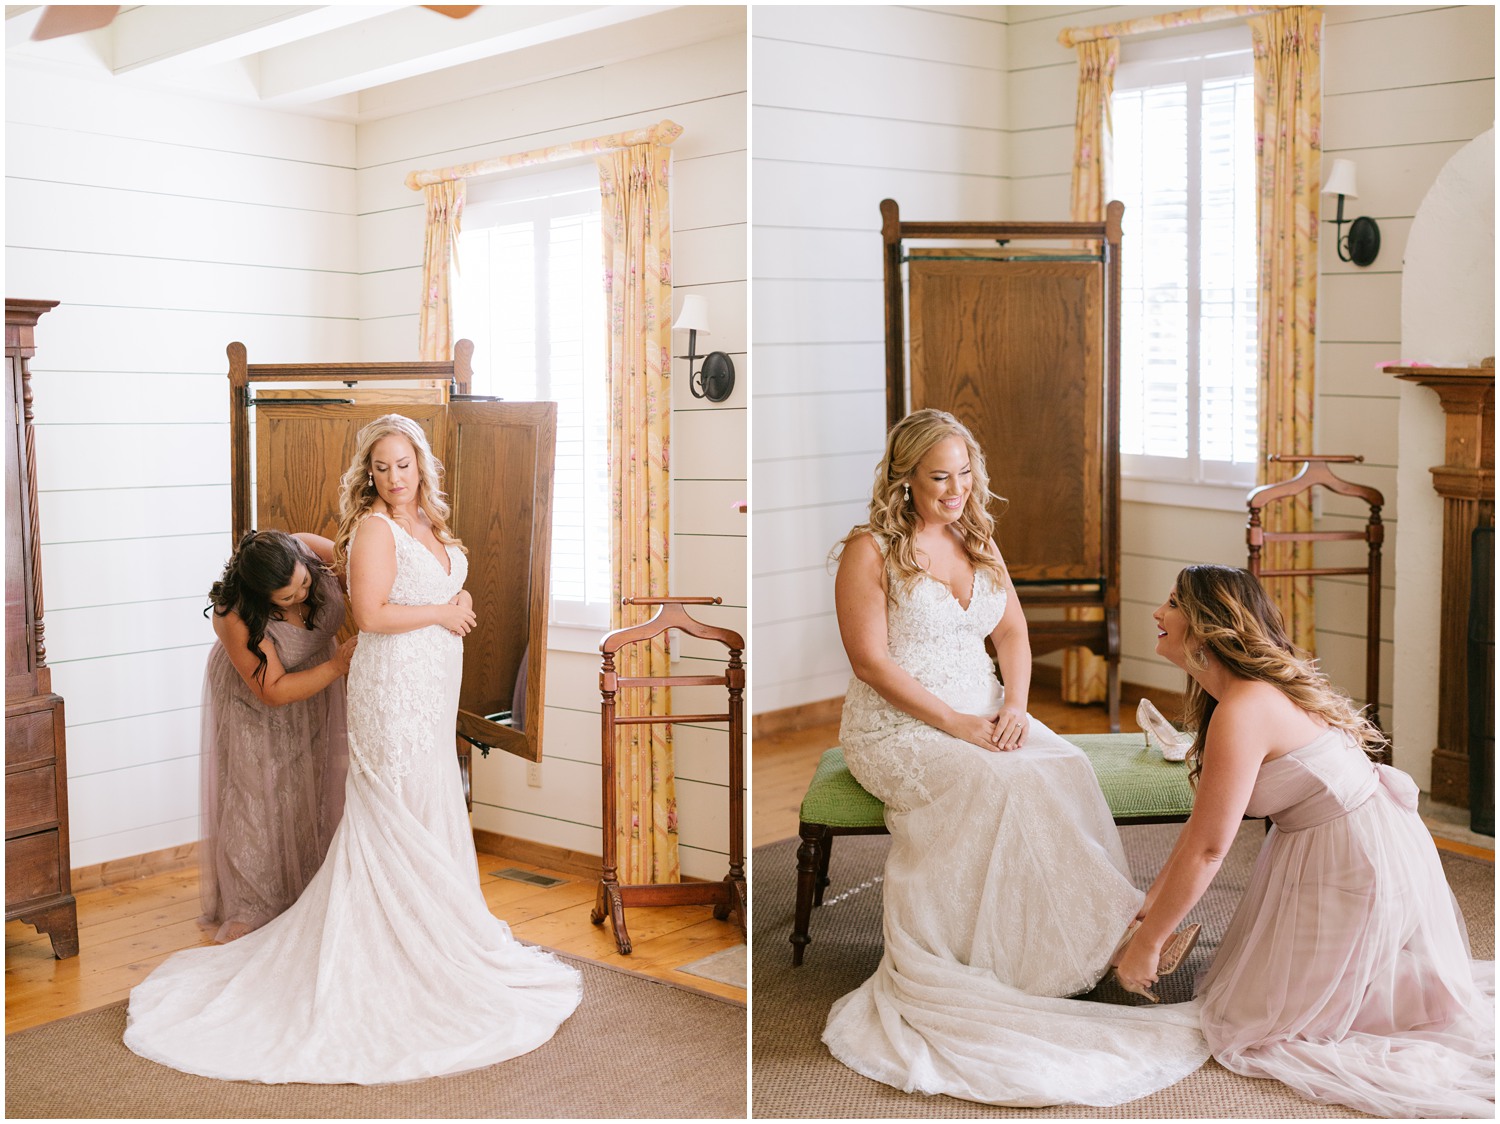 bridesmaid adjust wedding dress and helps bride with shoes on wedding day